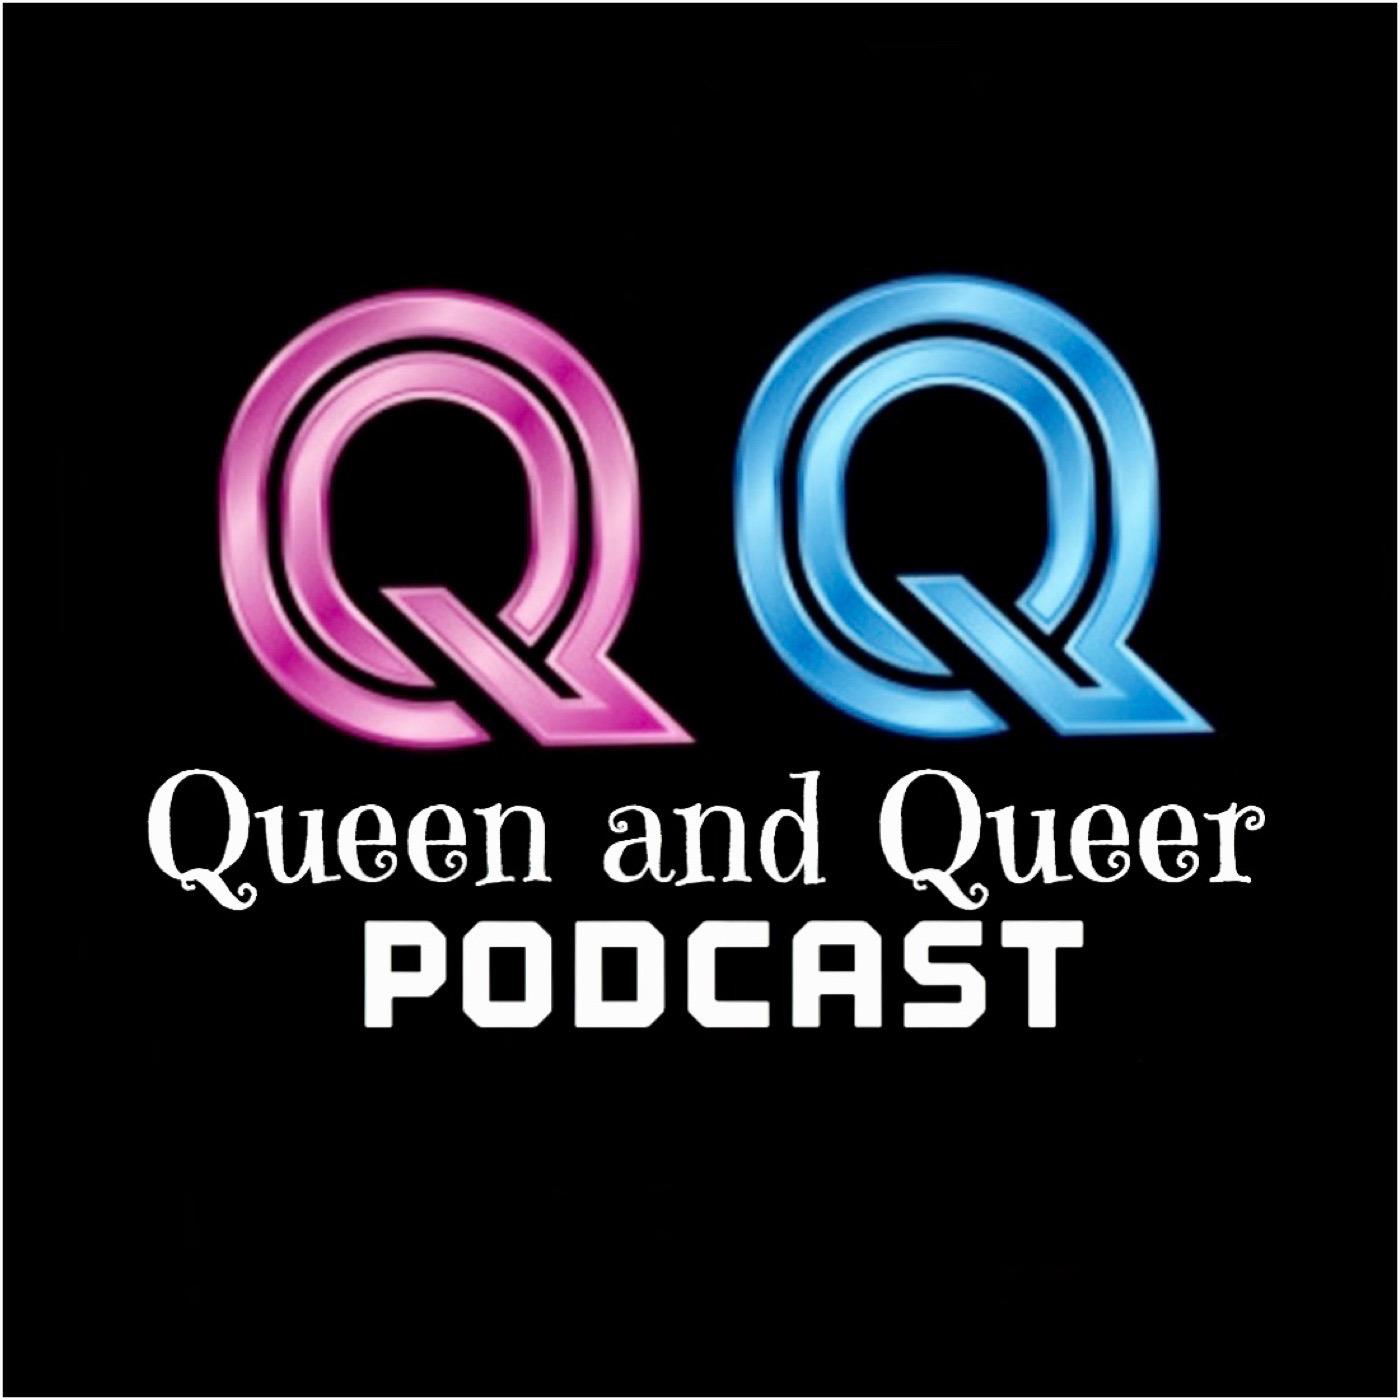 Queen and Queer Podcast